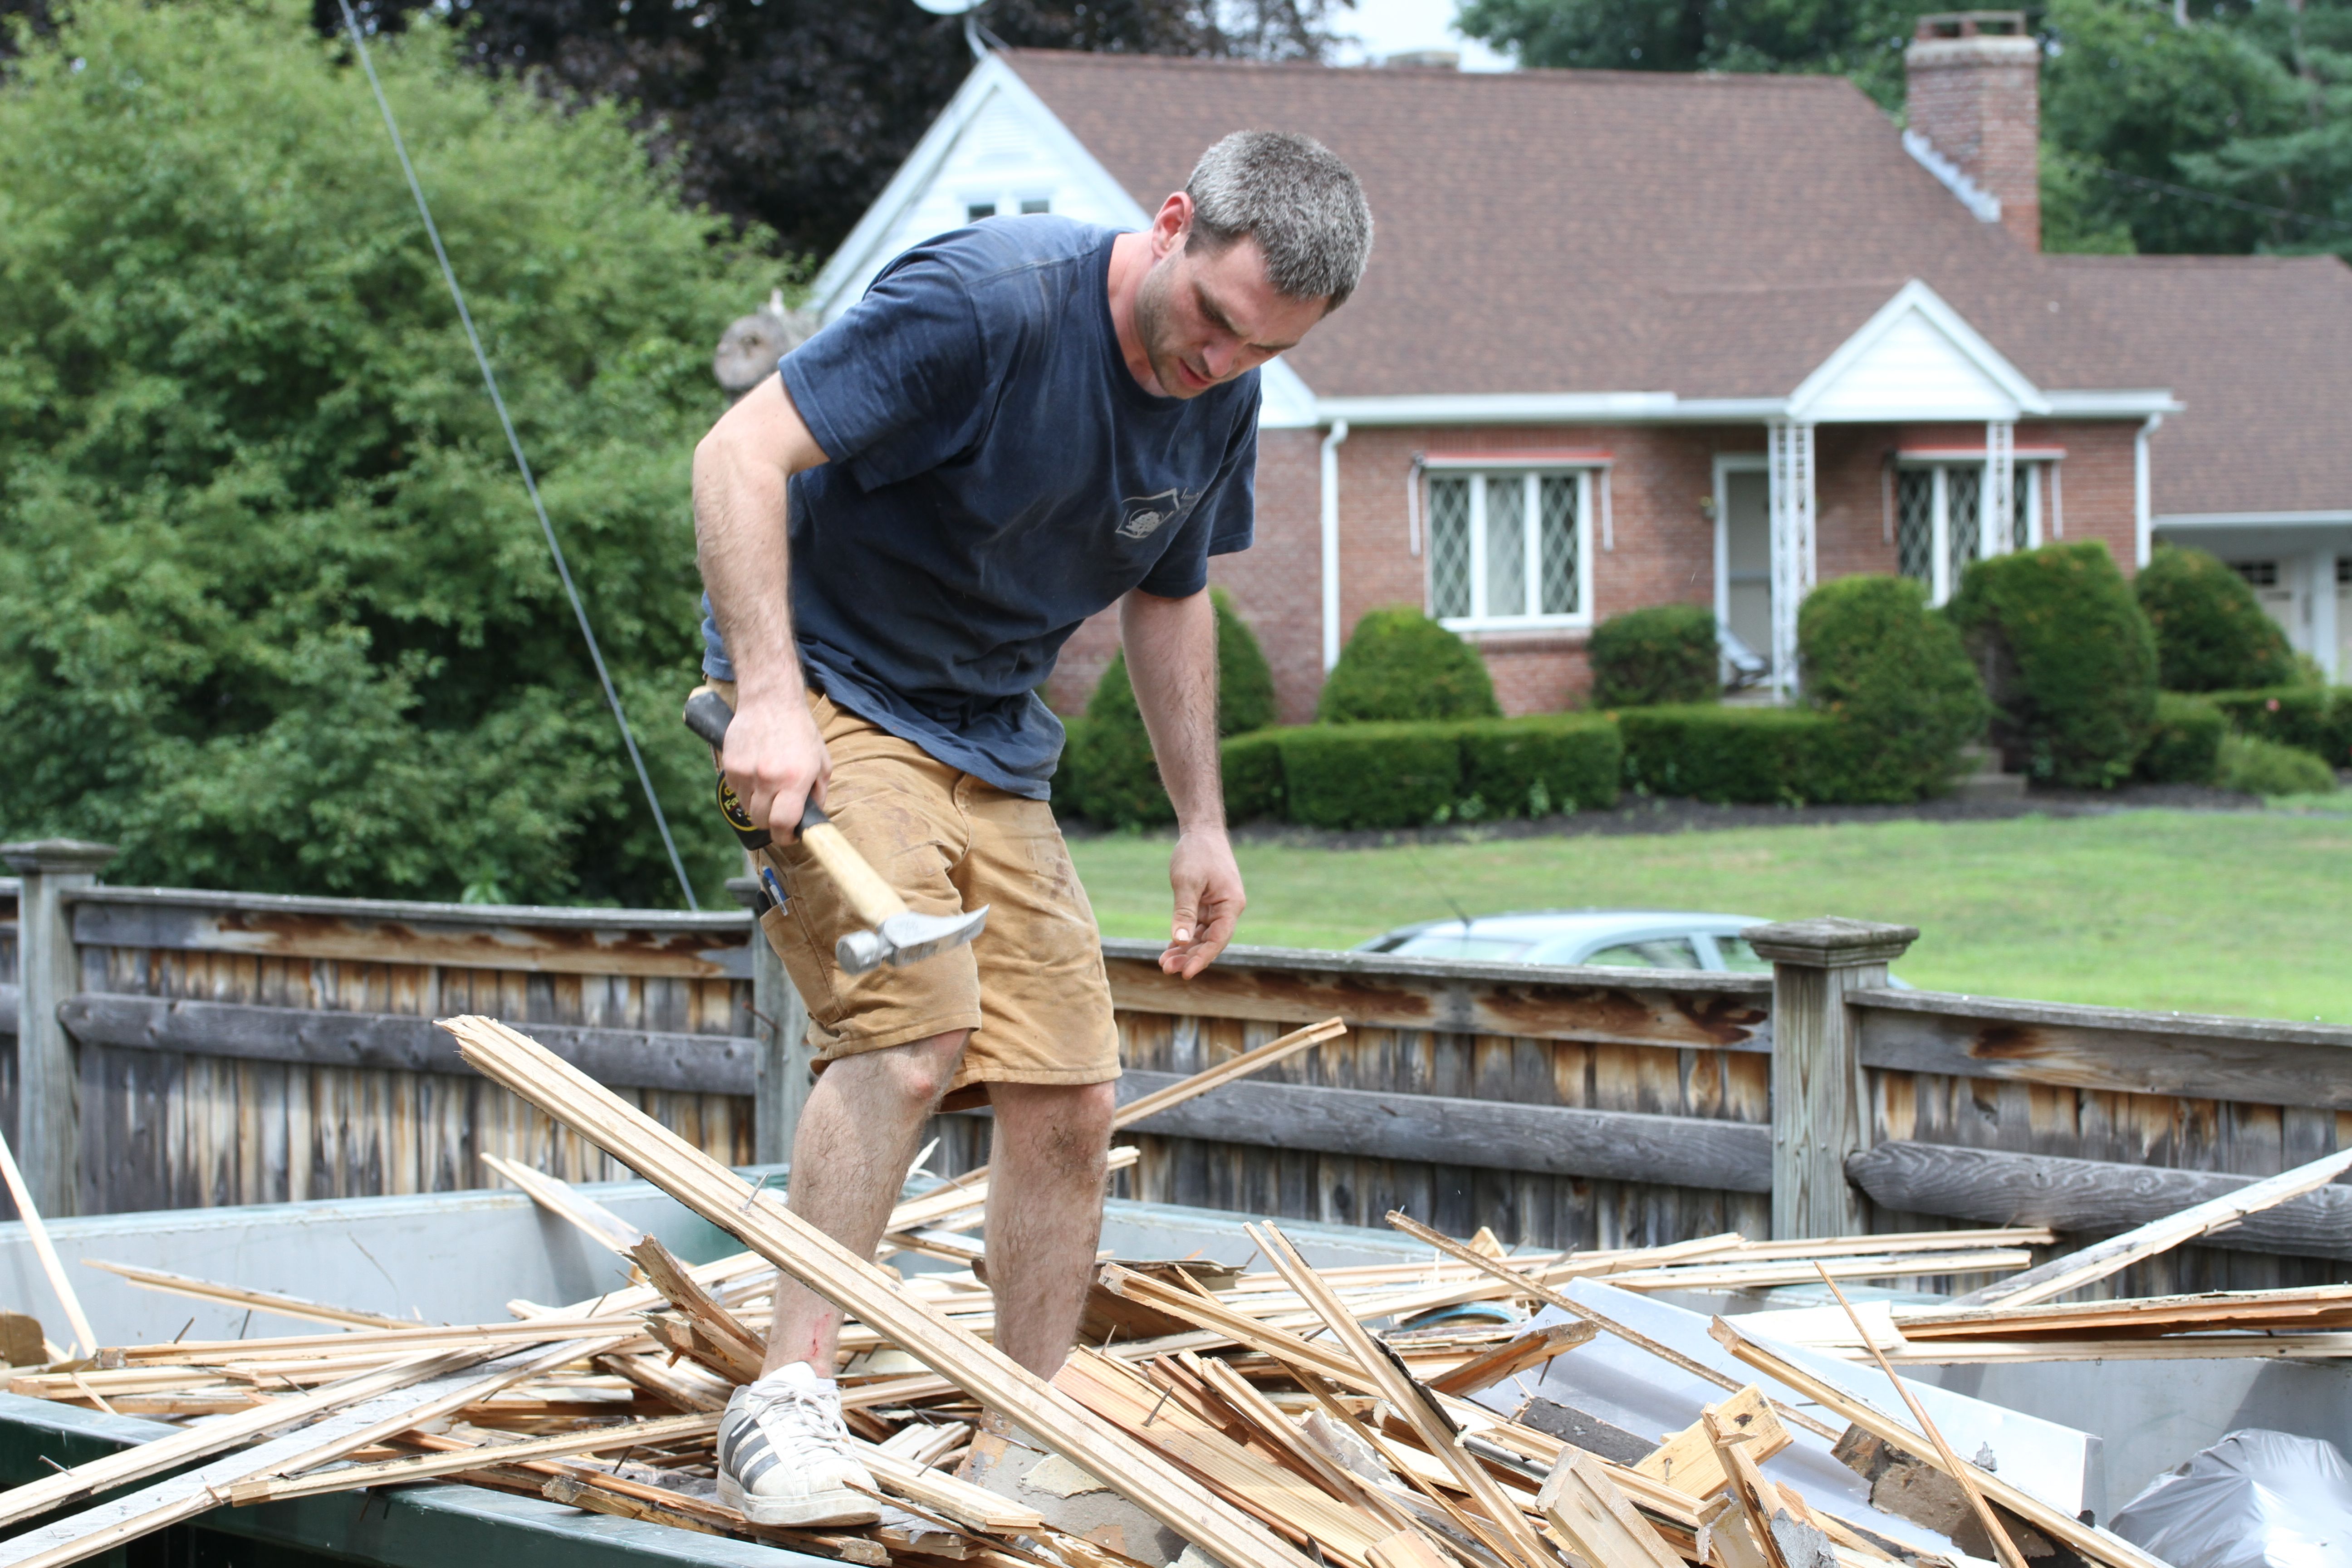 Jonas doing what you should NEVER do: walk on top of a pile of insecure lumber strewn with nails.